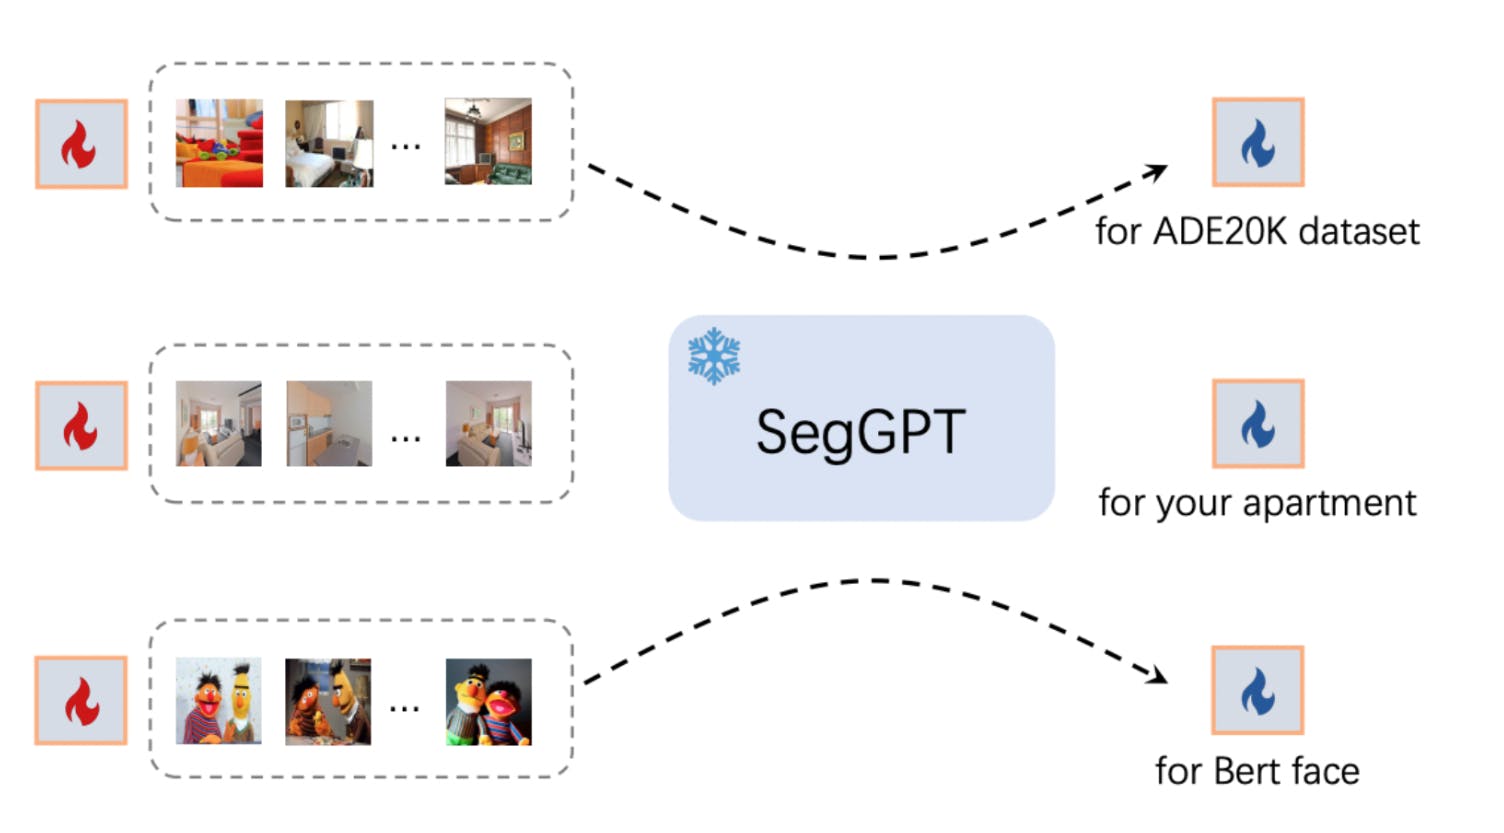 Segment anything (SAM) and segment everything in context SegGPT